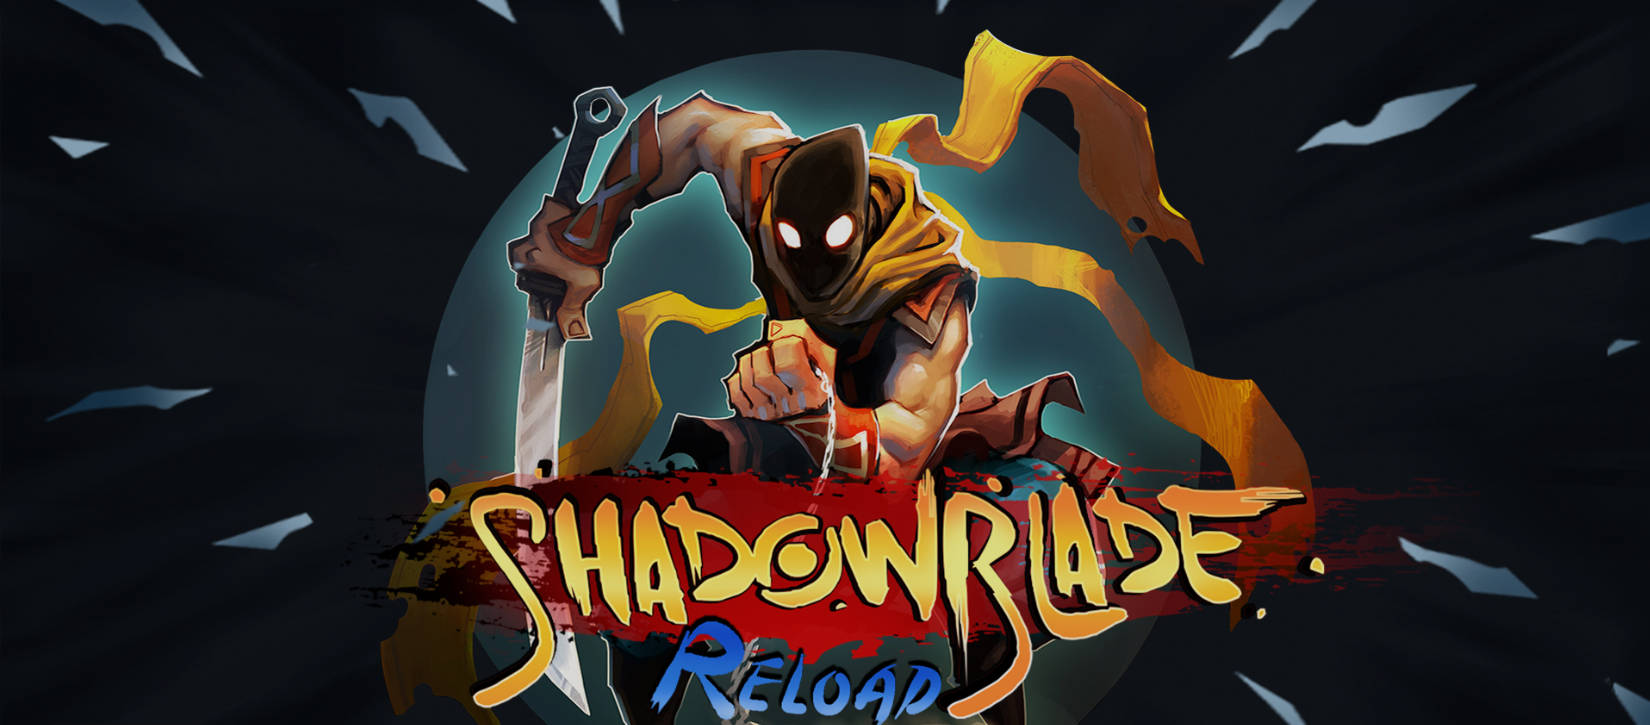 Shadow Blade Reload